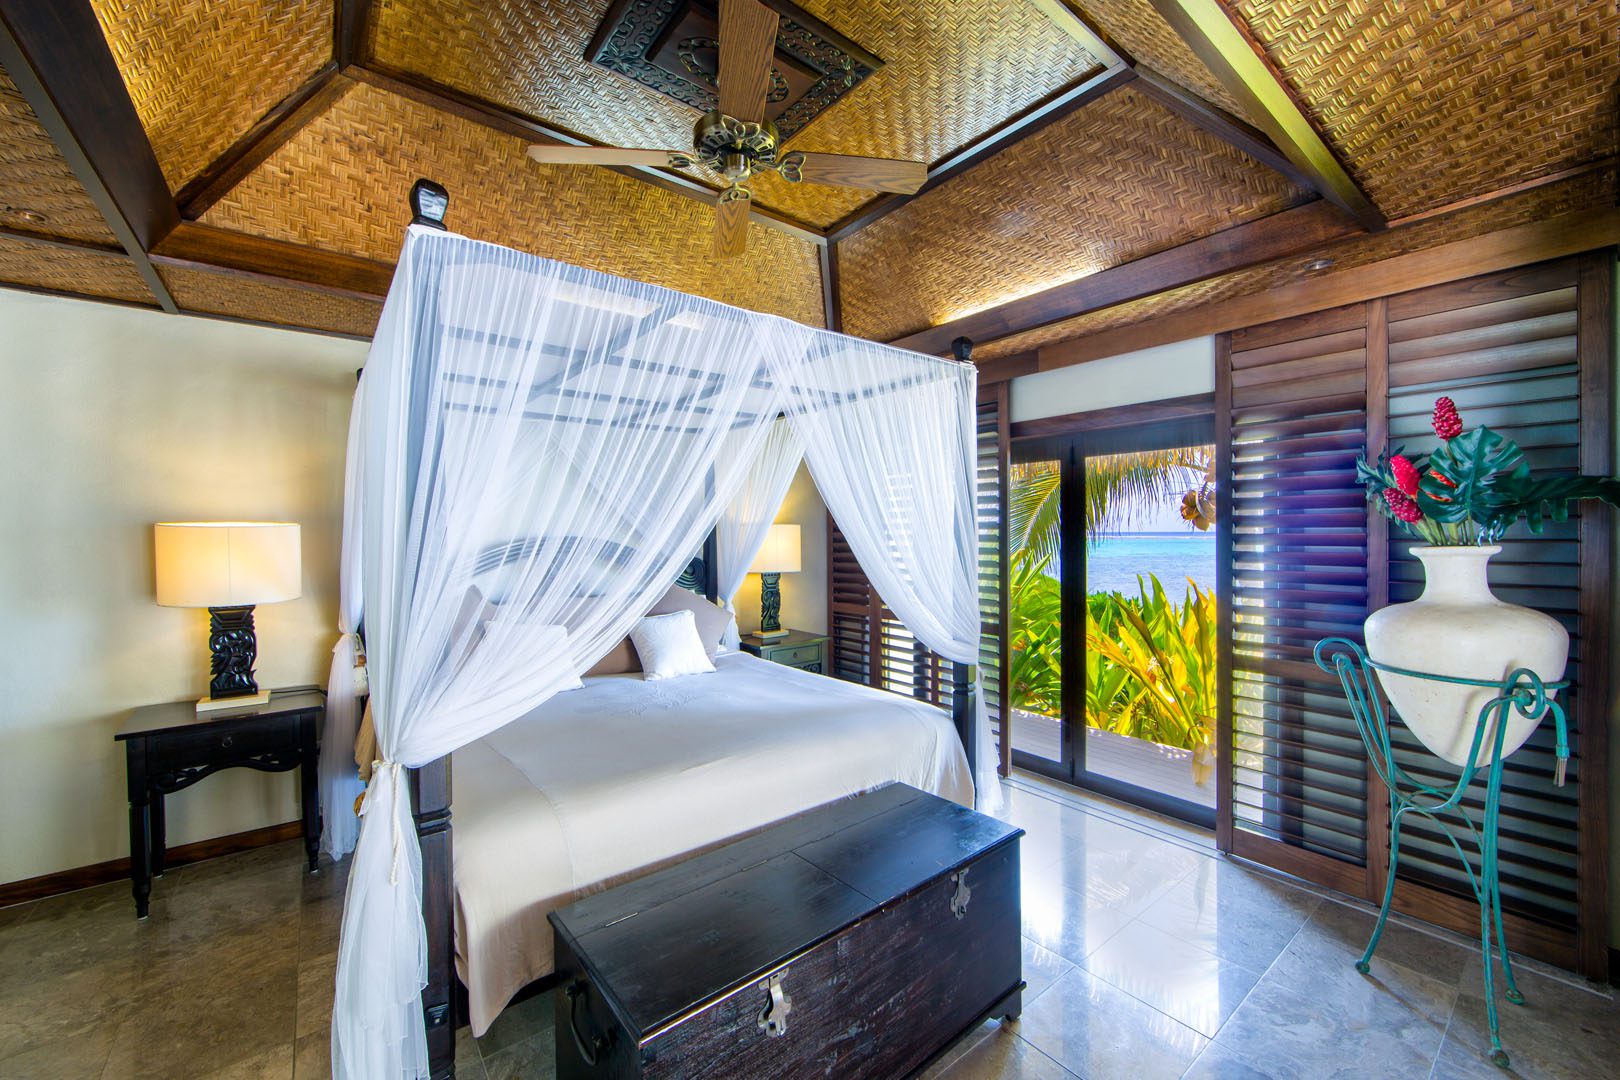 Te Manava Luxury Villas & Spa & Ultimate beachfront villa bedroom view from inside the master bedroom overlooking the water and gardens